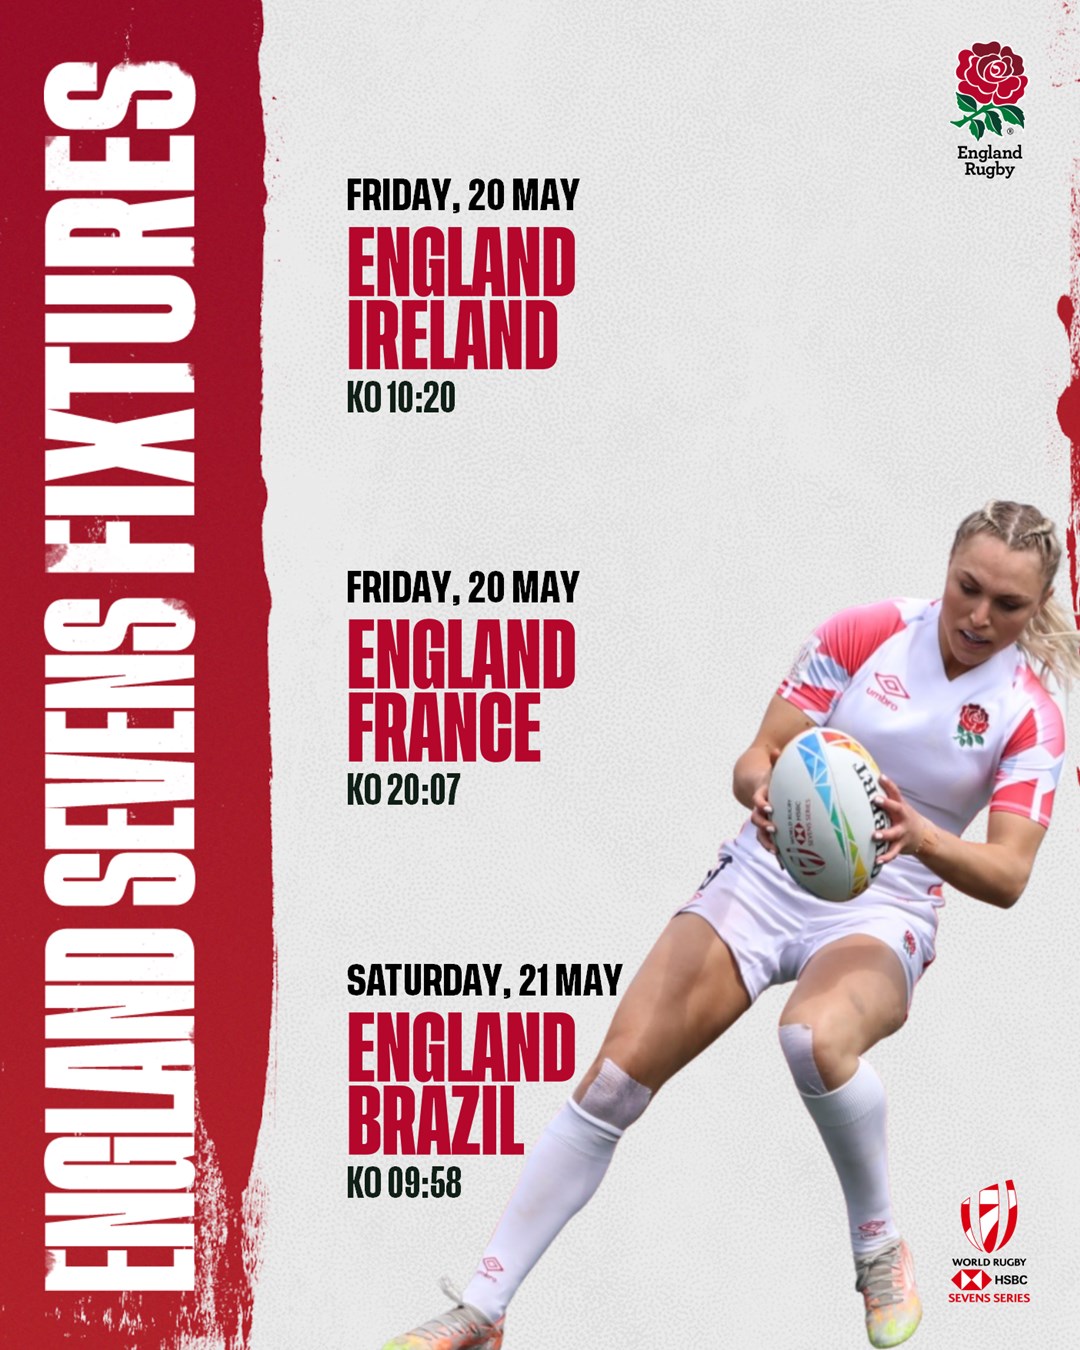 England Rugby on Twitter